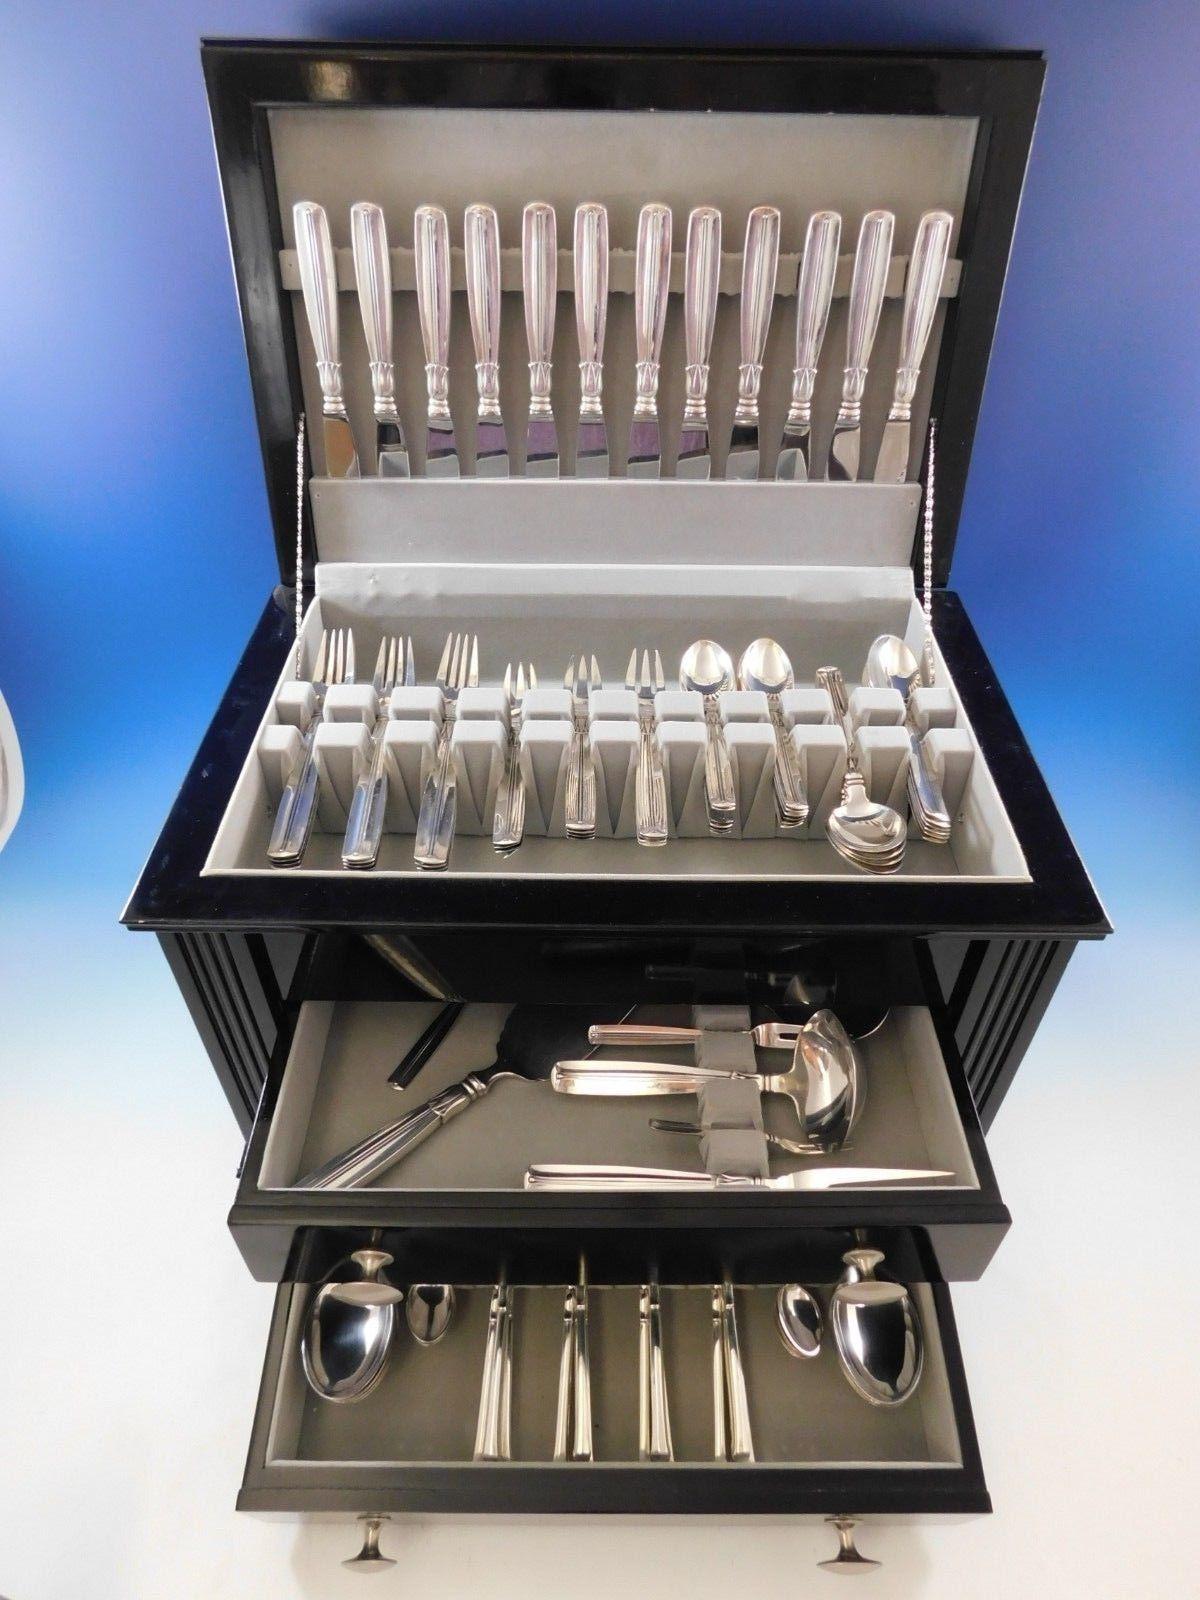 Exceptional Lotus by W&S Sorensen Danish sterling silver Scandinavian modern flatware set, 105 pieces. This set includes:

12 dinner knives, 8 3/4